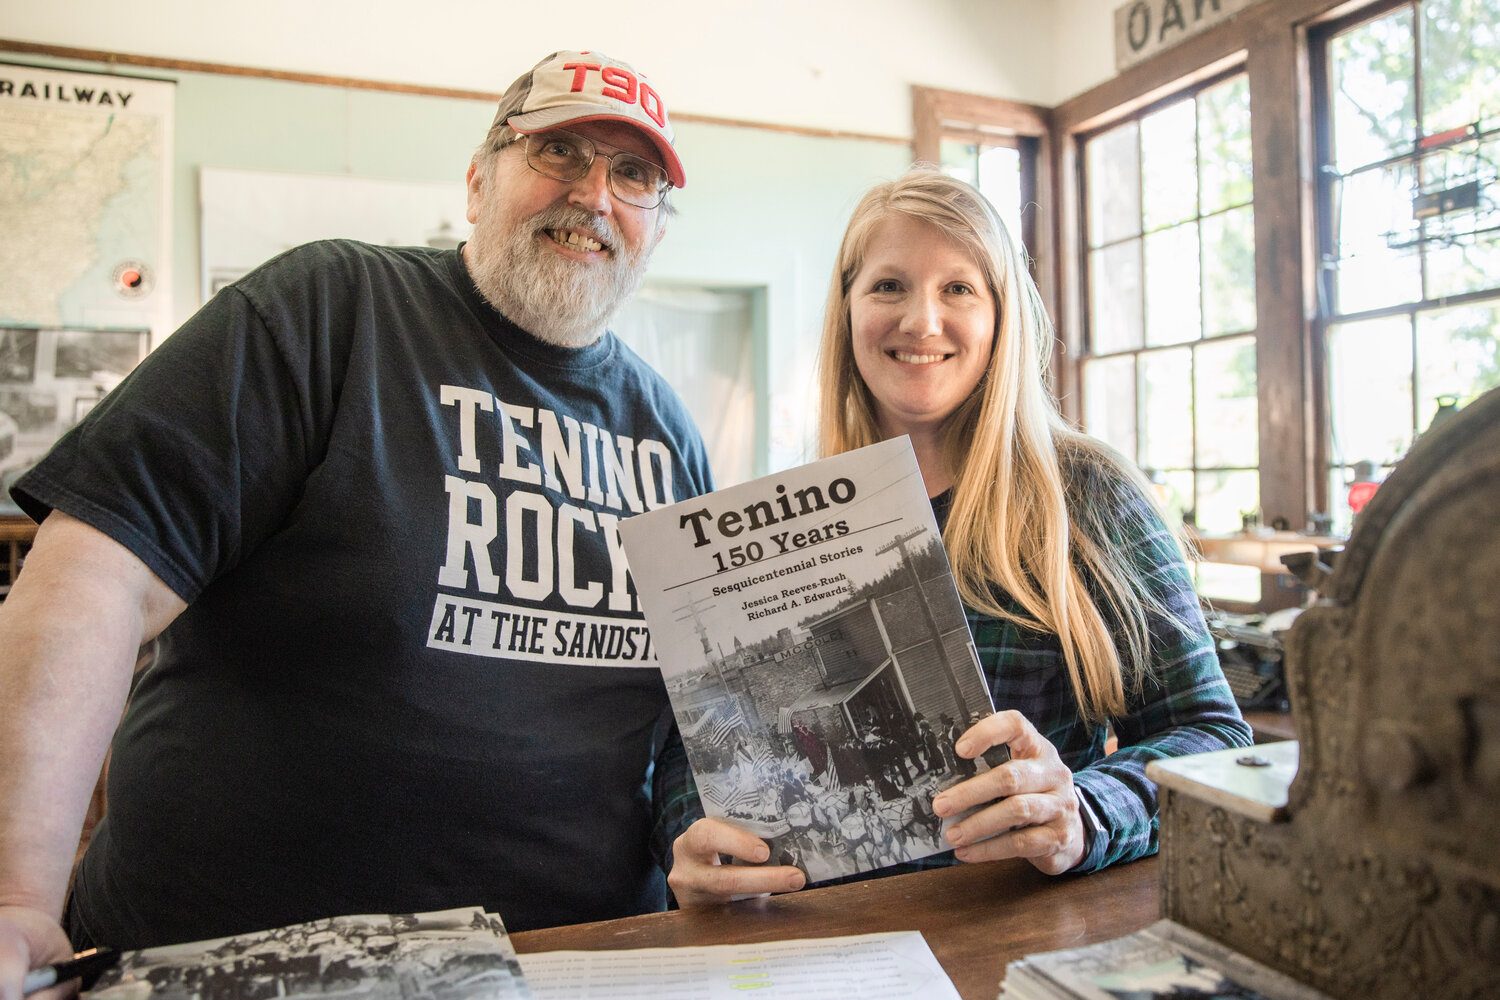 Tenino City Historian Richard Edwards and Tenino PARC (parks, arts, recreation and culture) Director Jessica Reeves-Rush smile for a photo in Tenino on Friday with their new, co-authored book celebrating the 150th birthday of the Stone City.